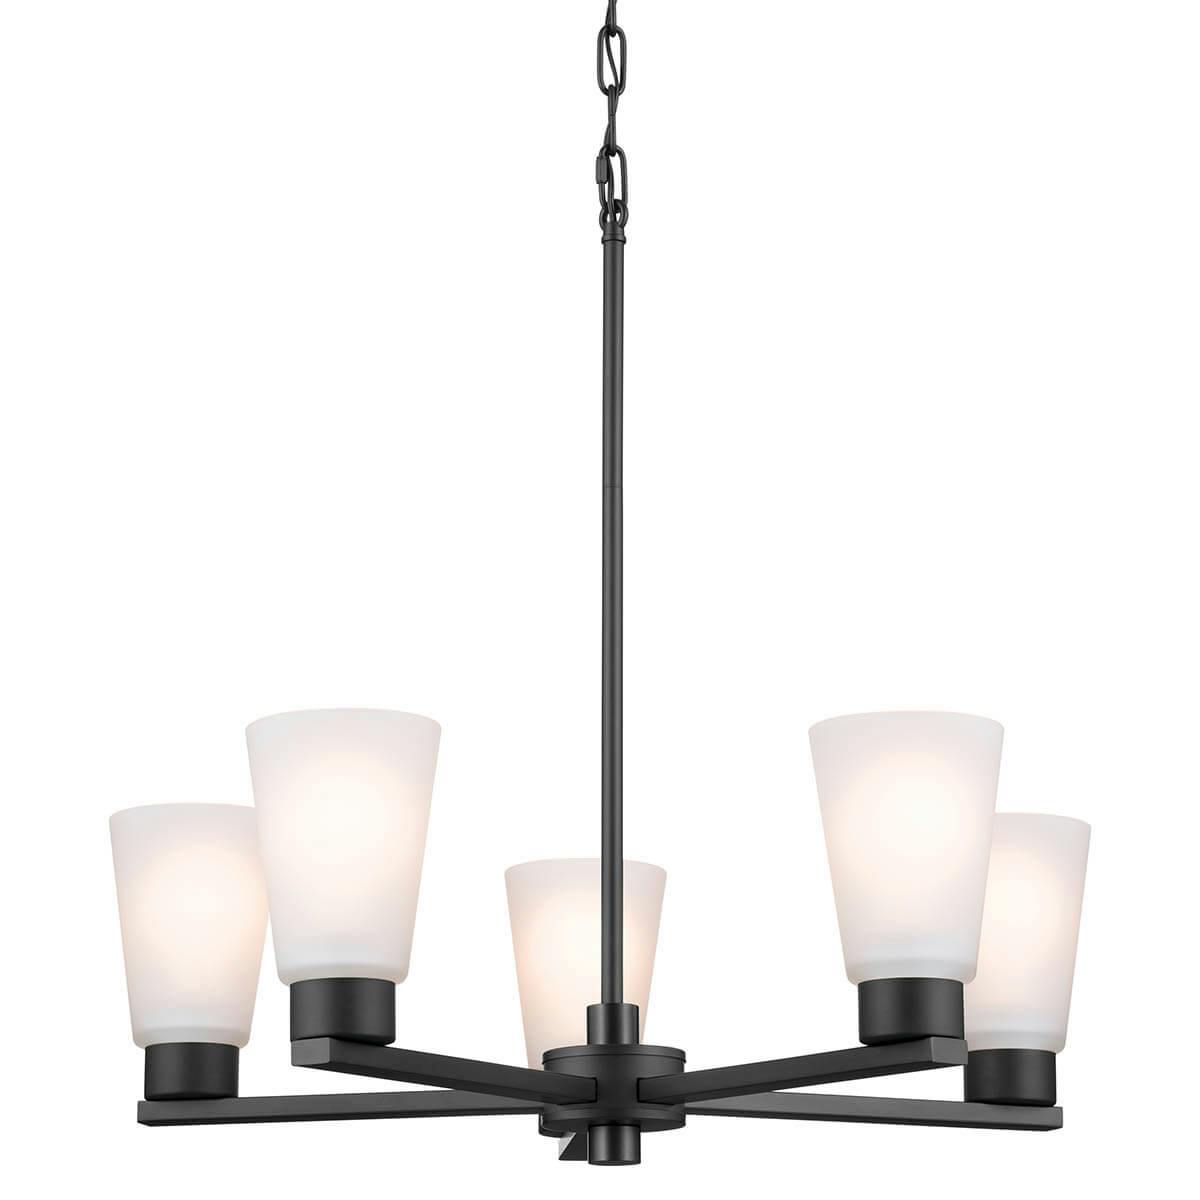 Stamos 24" 5 Light Chandelier Black without the canopy on a white background